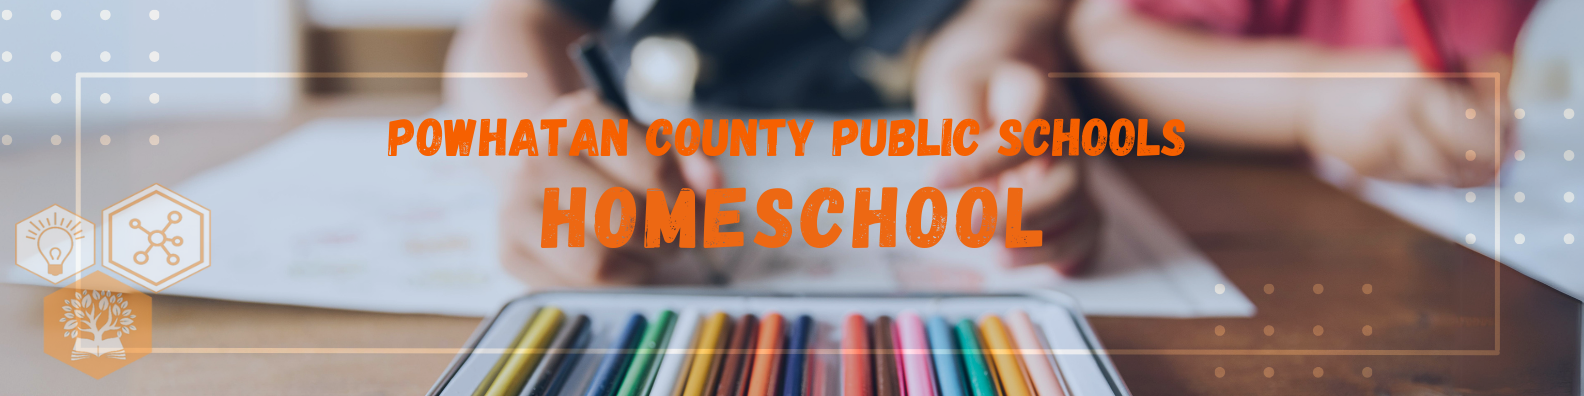 homeschool banner with two children with colored pencils in the background